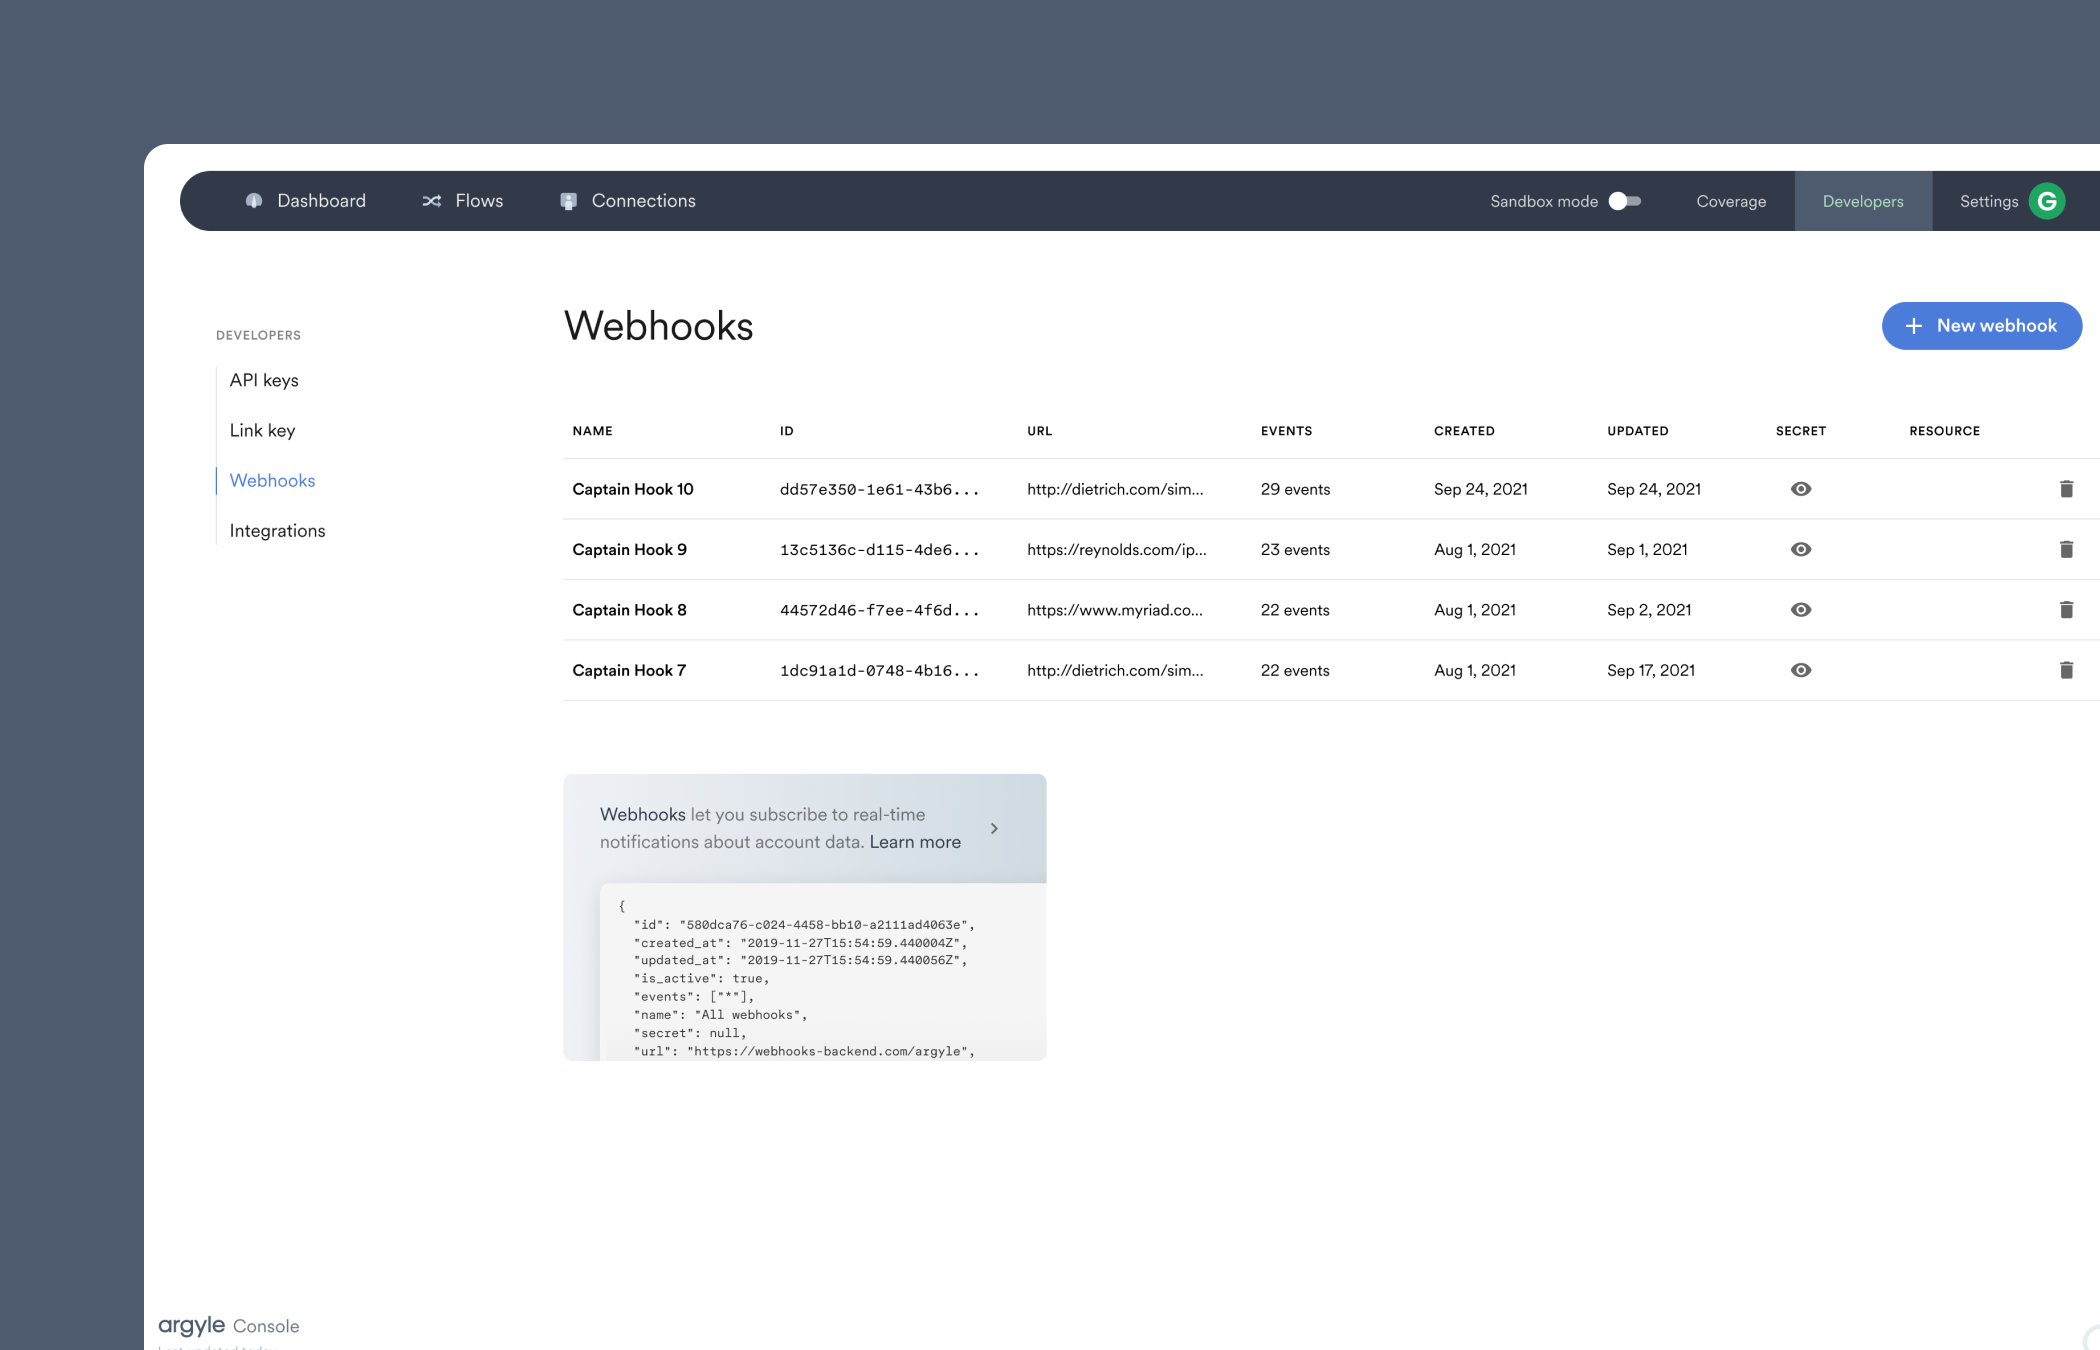 Webhooks can be created in the Developers section of Console.